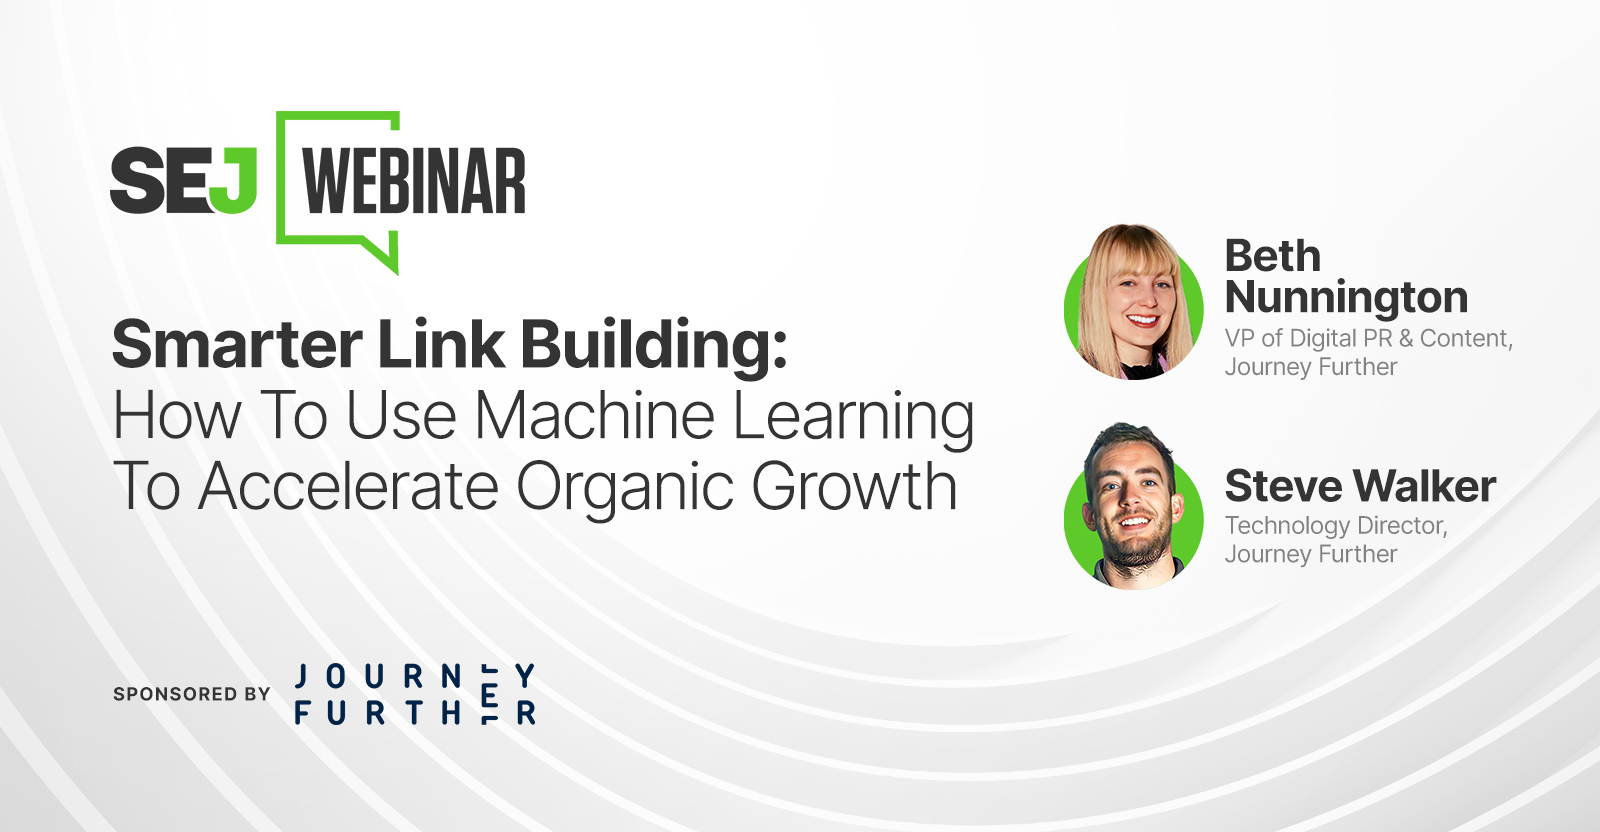 How To Work With Machine Studying [Webinar]